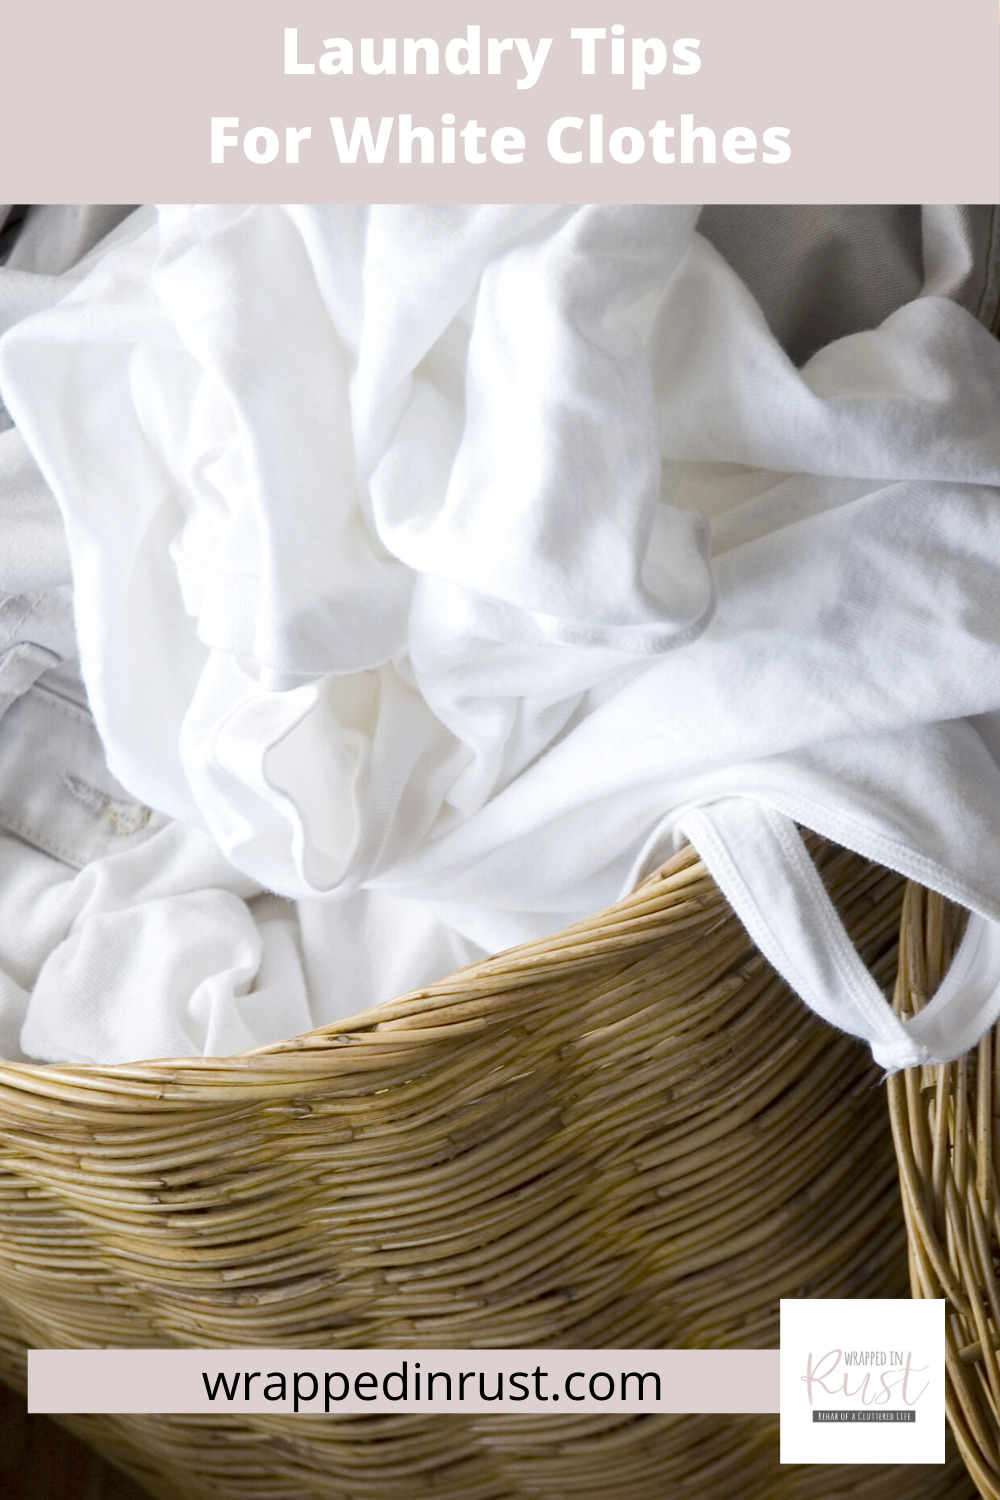 Did you know the main ingredient in aspirin is salicylic acid? And just what is so important about salicylic acid? It turns out that it can be used to get your dingy white socks white again! Find out how to use this laundry tip for getting all of your white clothes white! #wrappedinrustblogpost #laundrytips